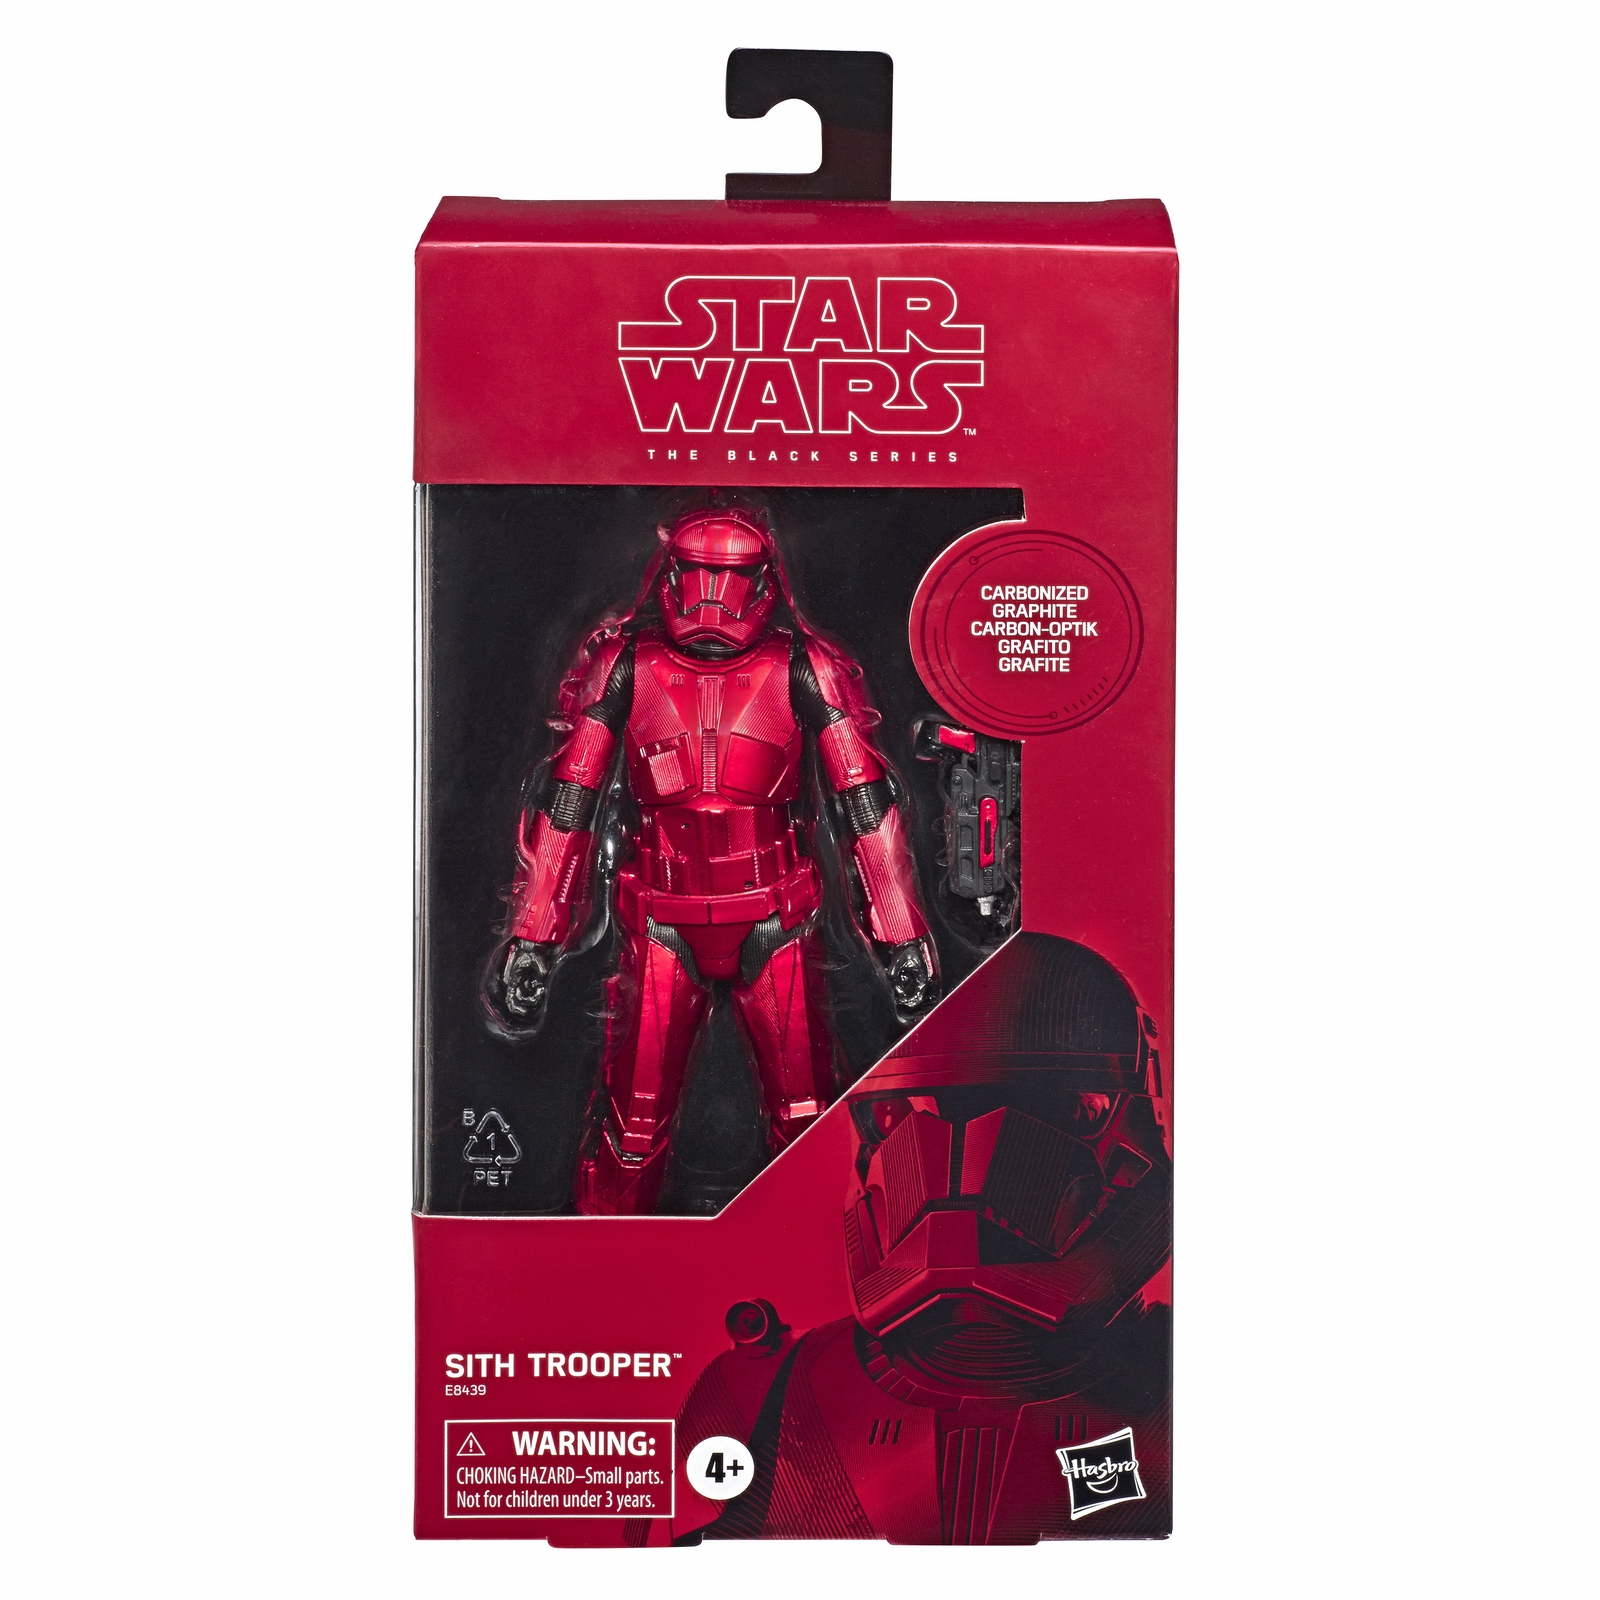 STAR WARS THE BLACK SERIES 6-INCH SITH TROOPER CARBONIZED COLLECTION Figure - in pck.jpg